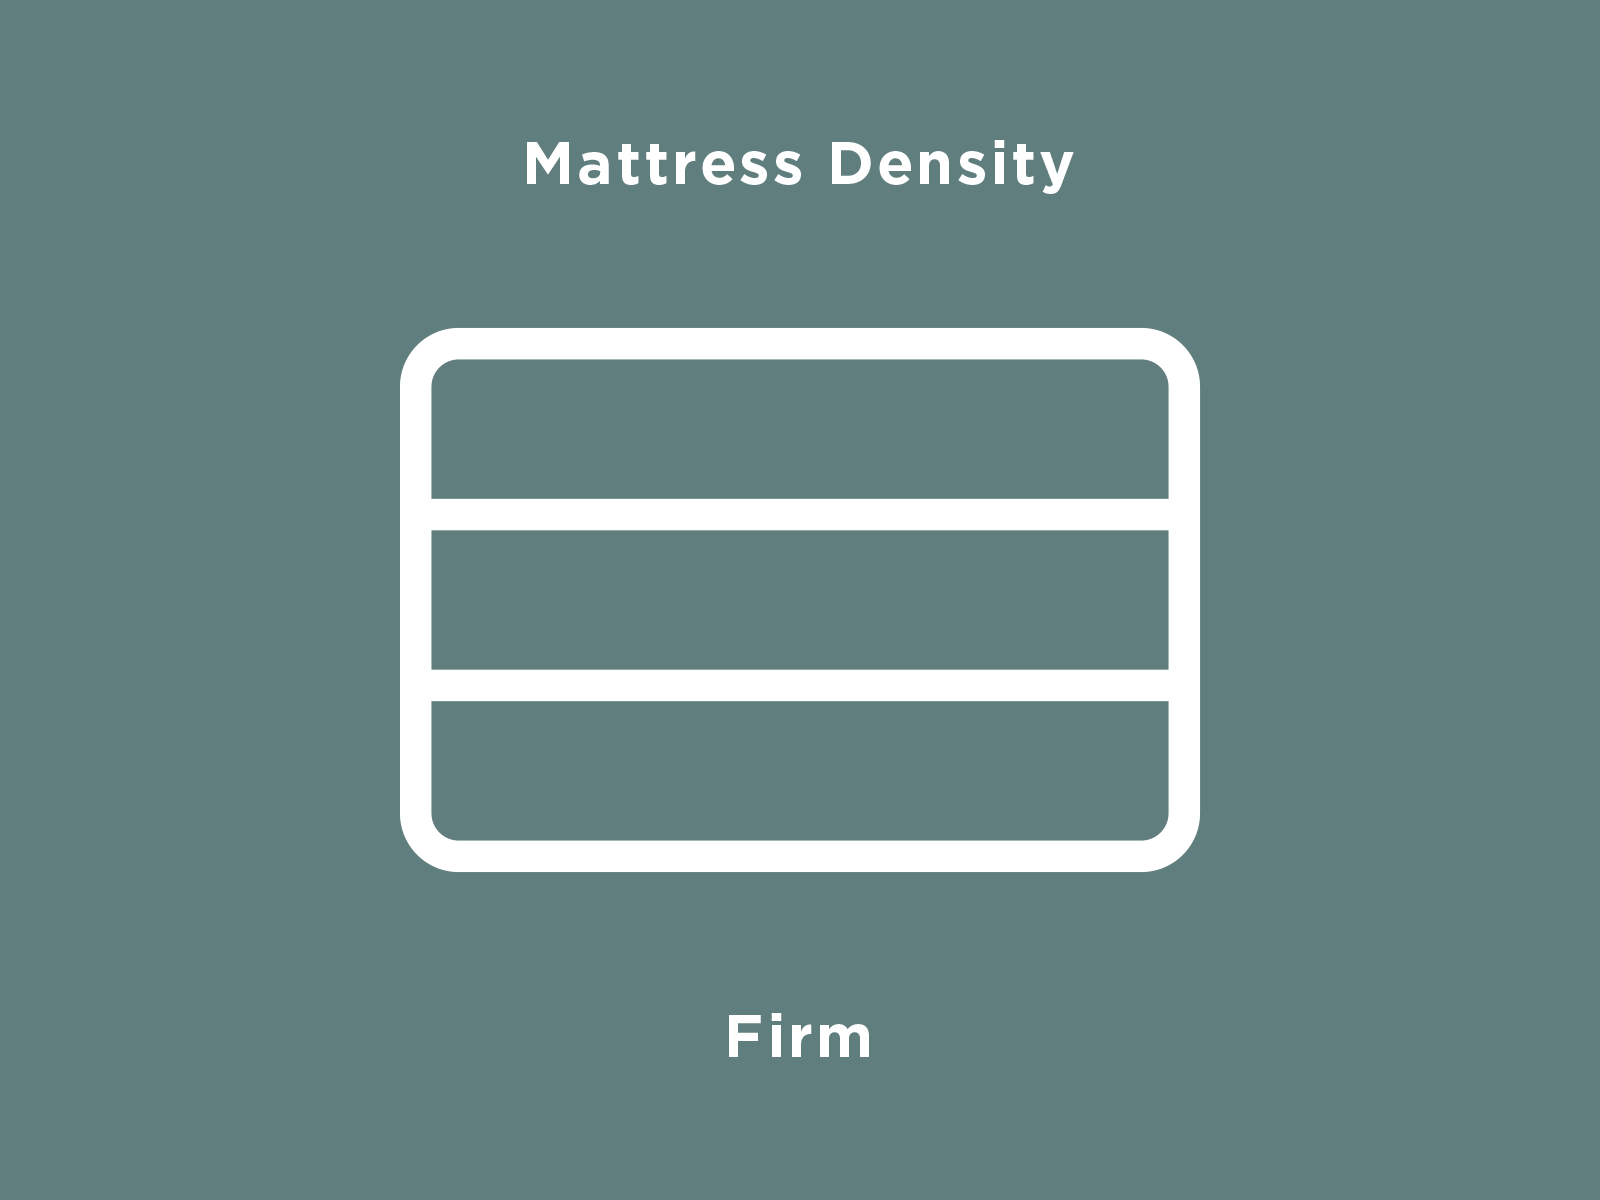 Does This Feel Right? bed bedding density design firm icon iconography linework mattress monoline semifirm semisoft sleep soft